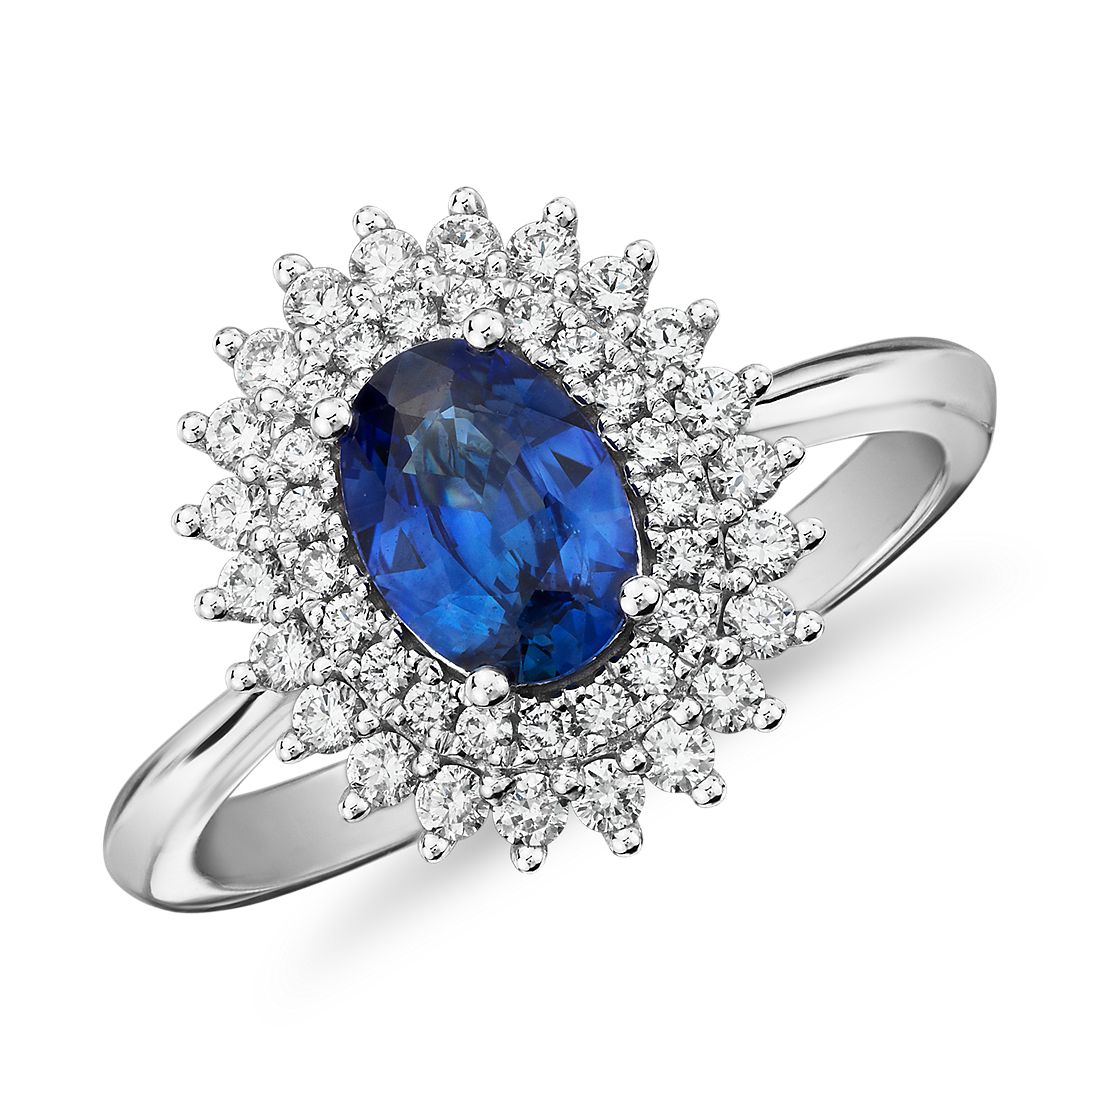 Details about   3.85 ct Oval Blue Sapphire & Sim Diamond Halo Fashion Ring 14k White Gold Plated 